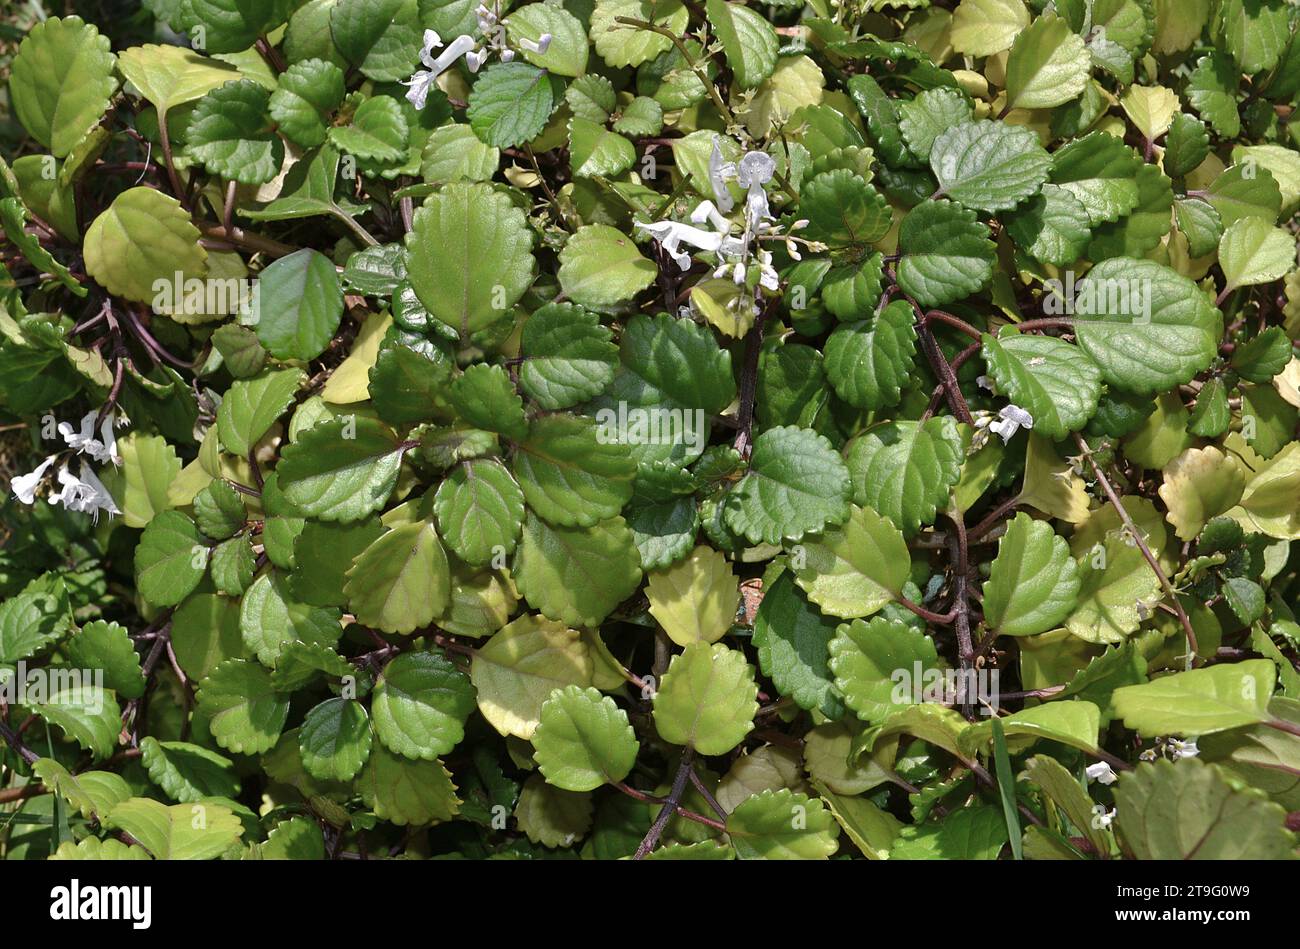 Dolar, a very branched, creeping plant called a dollar. Scientific name: Plectranthus verticillatus. Produces tiny white flowers. Stock Photo